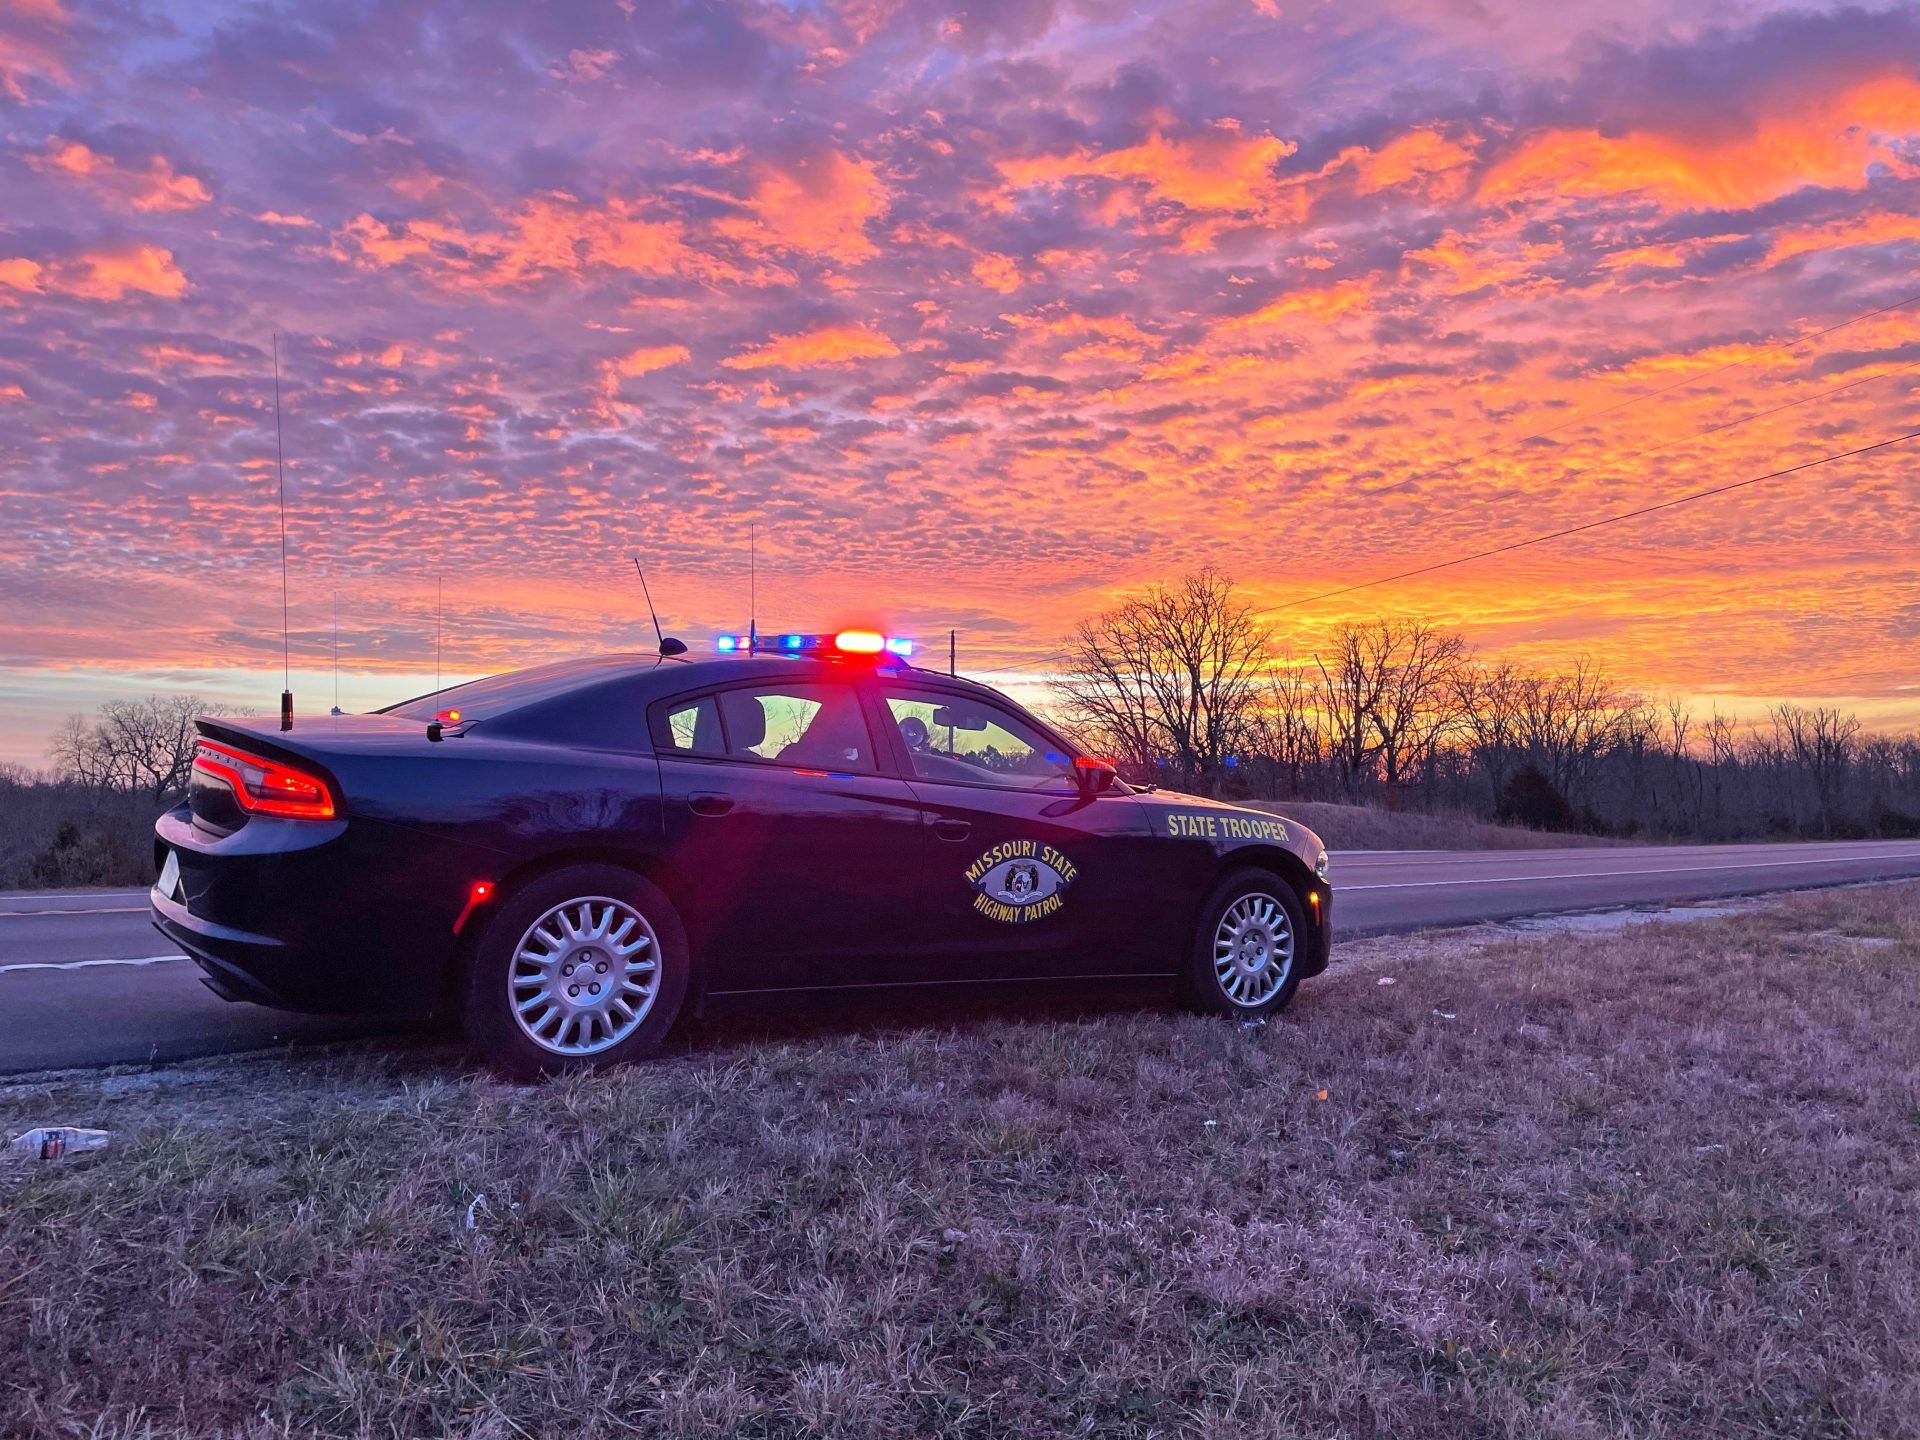 (AUDIO): Every available Missouri state trooper is on highways and lakes this weekend